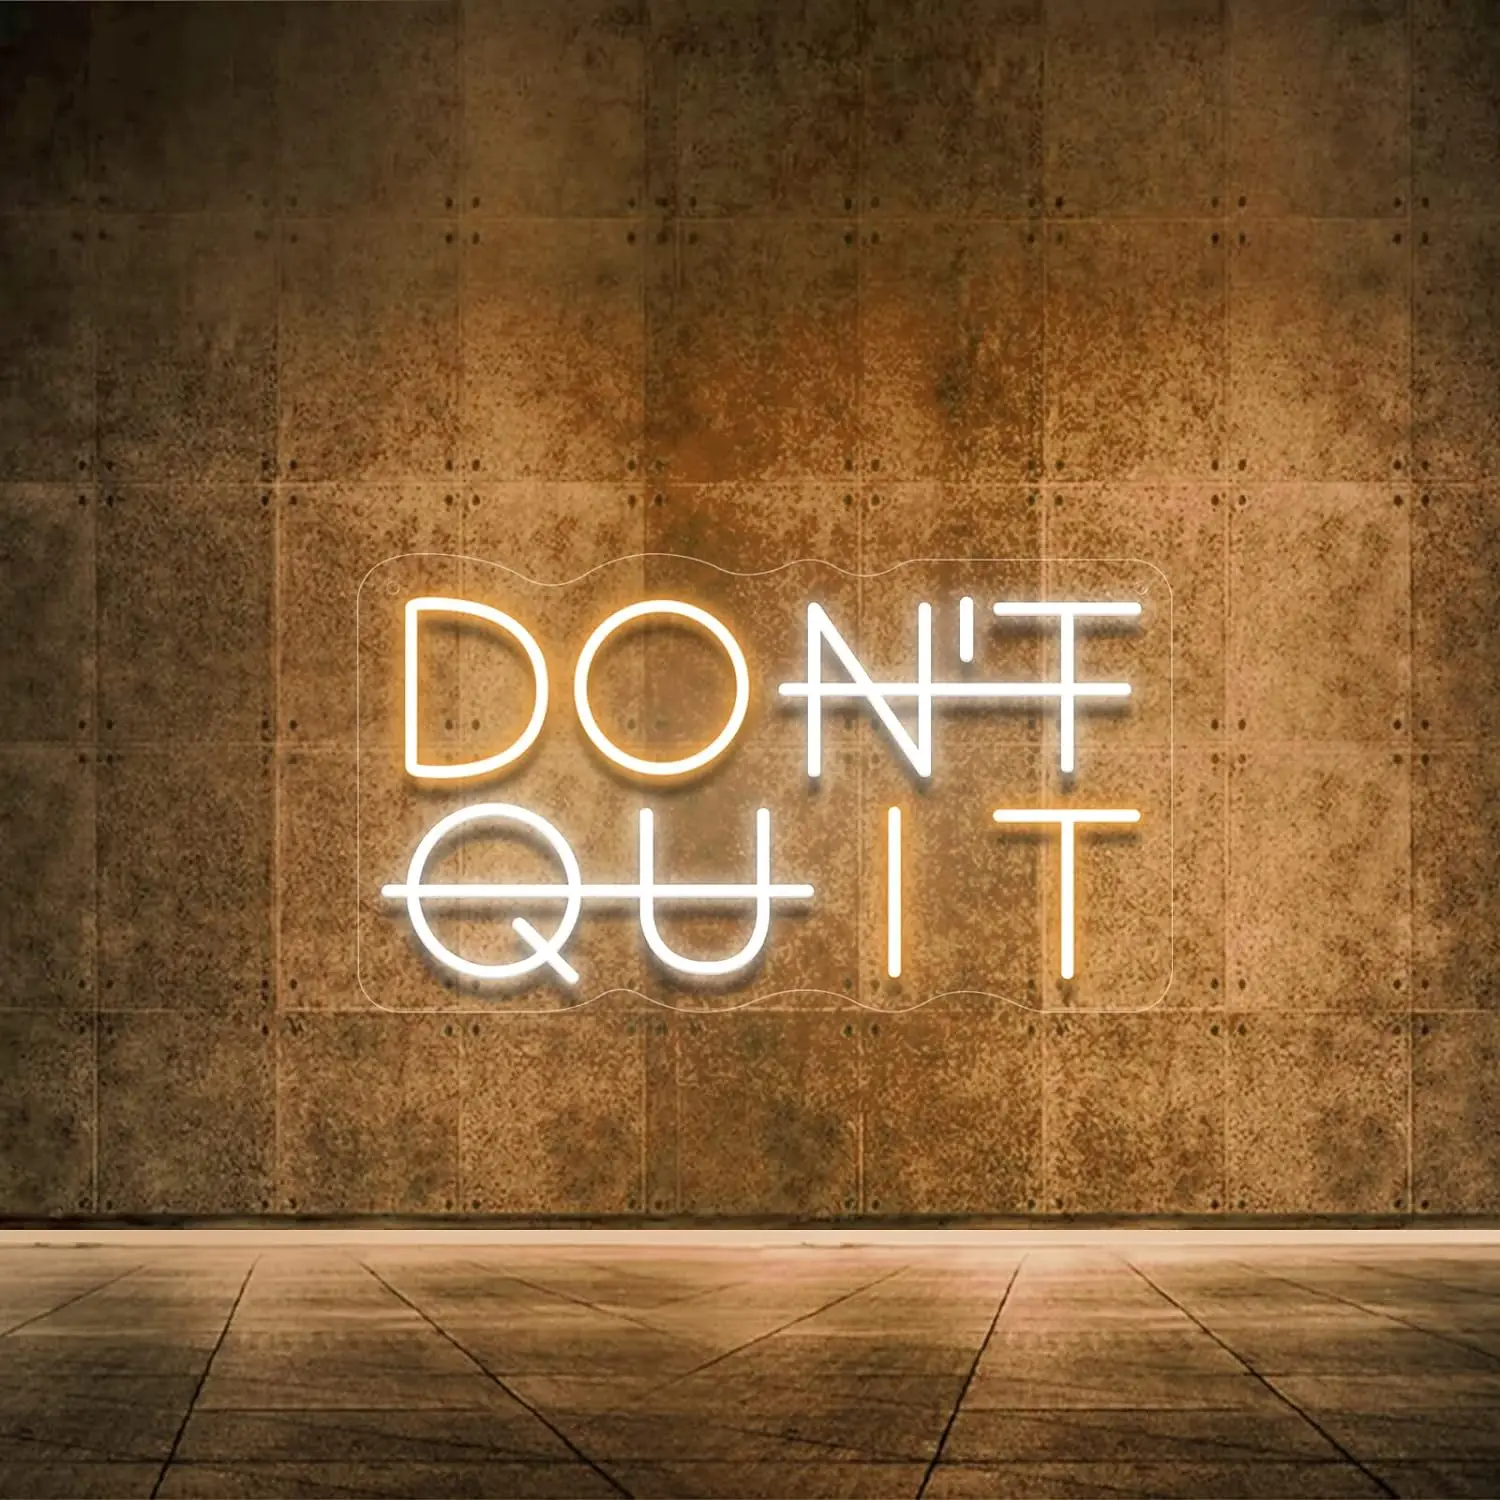 

Don't Quit LED Neon Sign for Wall Decor Custom Neon Sign Neon Lights for Office Room Gym Room Bedroom Man Cave Gamer Room Gifts